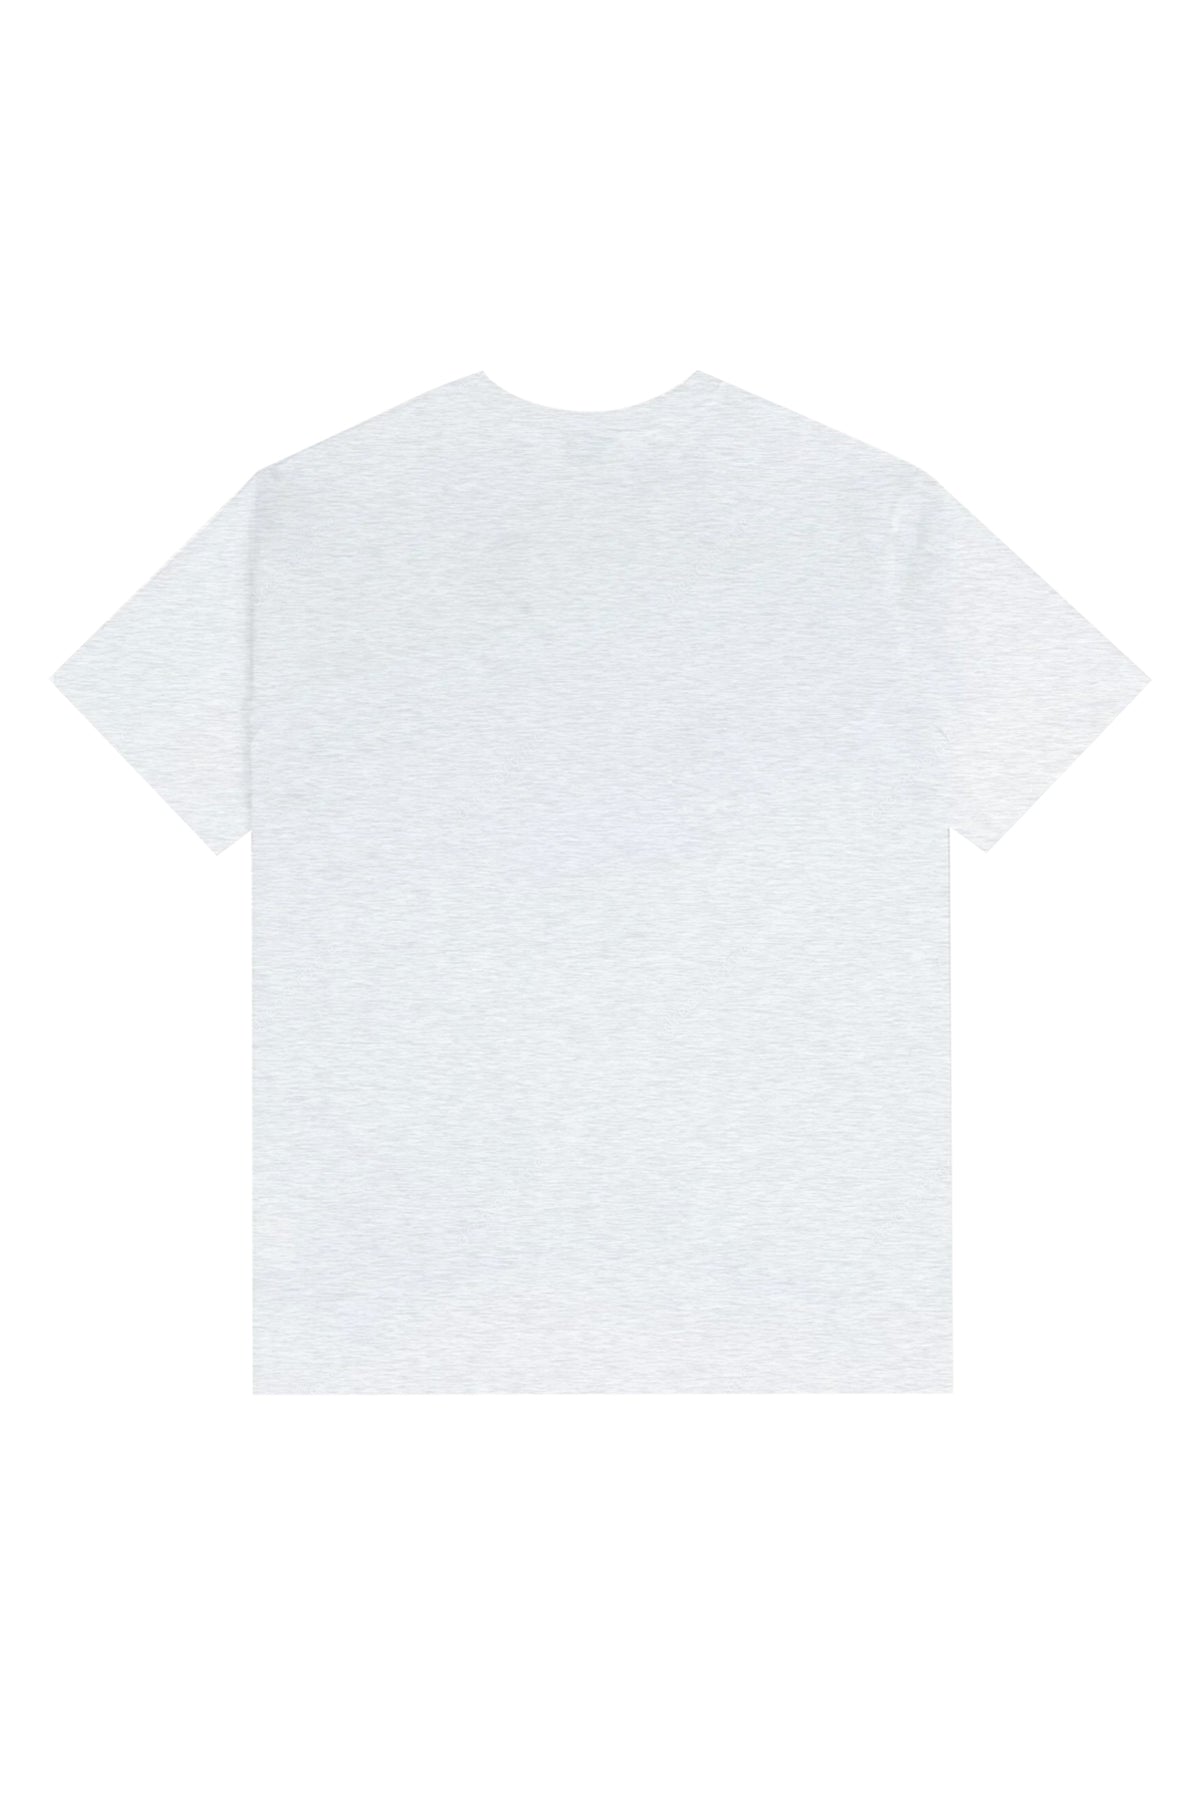 Meowroccan Stamp Tee Ash White